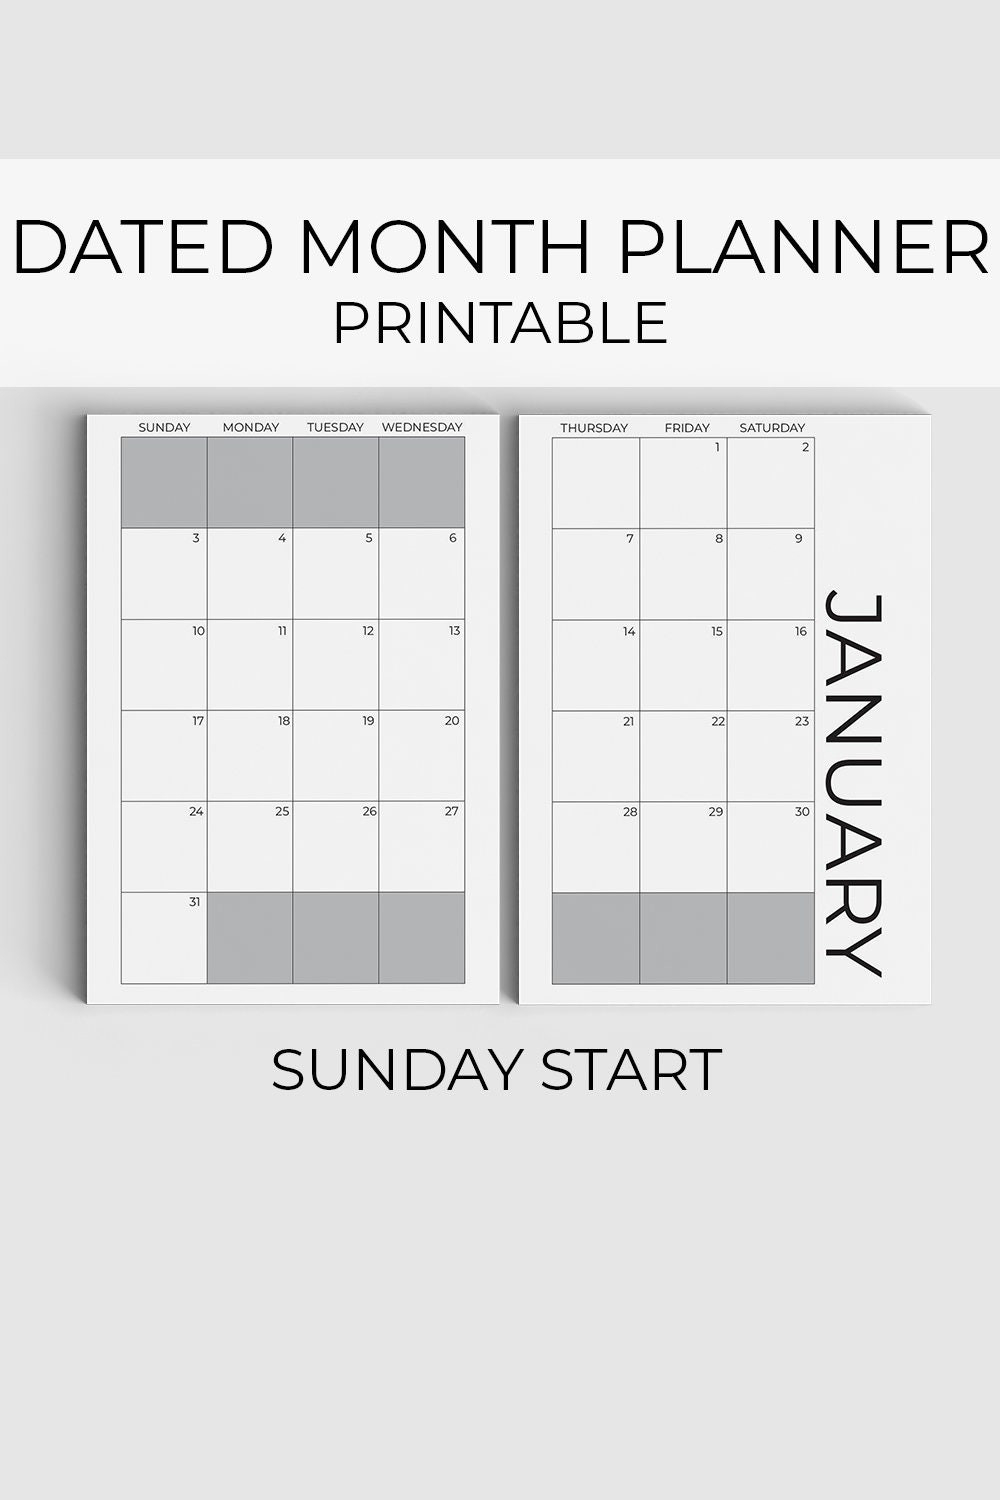 2021 Monthly Planner Printable, Sunday Start, Dated-Printable 2021 Monthly Calendar 2 Pages